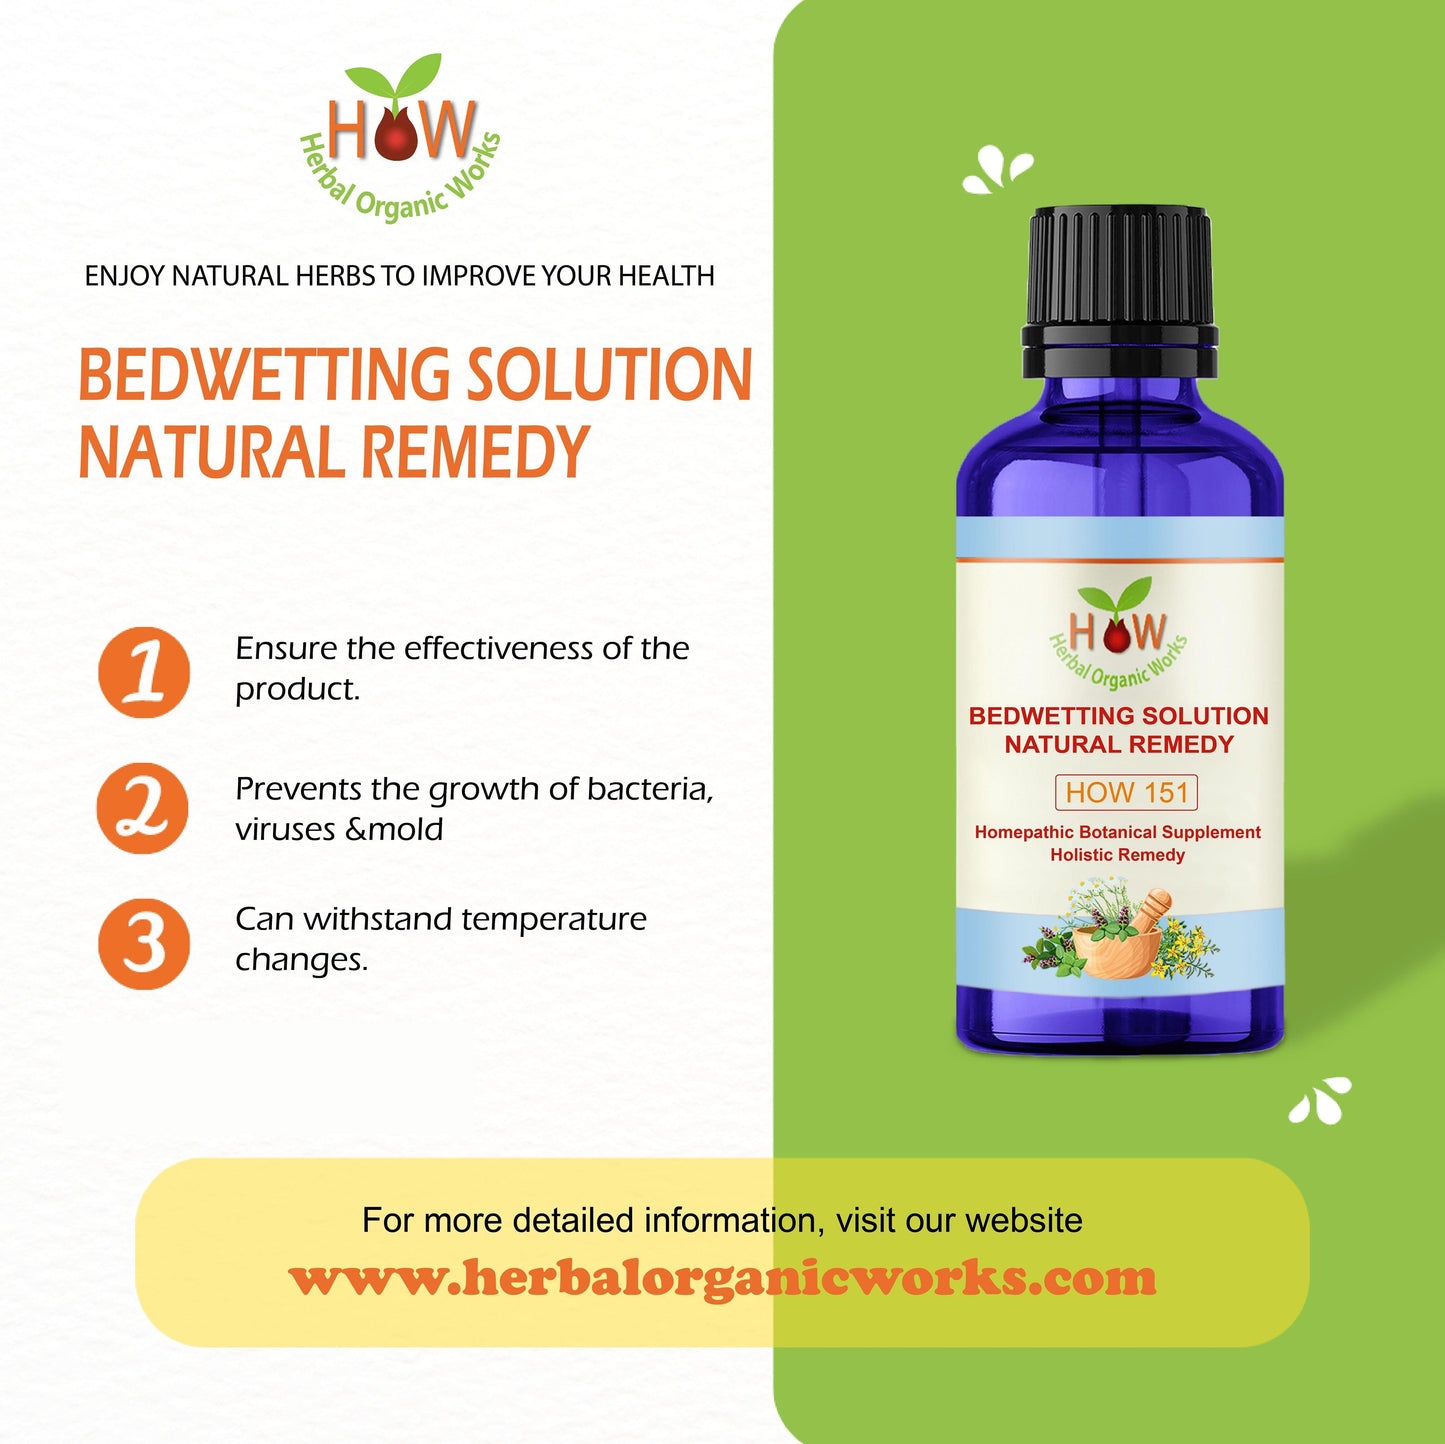 BED WETTING SOLUTION NATURAL REMEDY (HOW151)